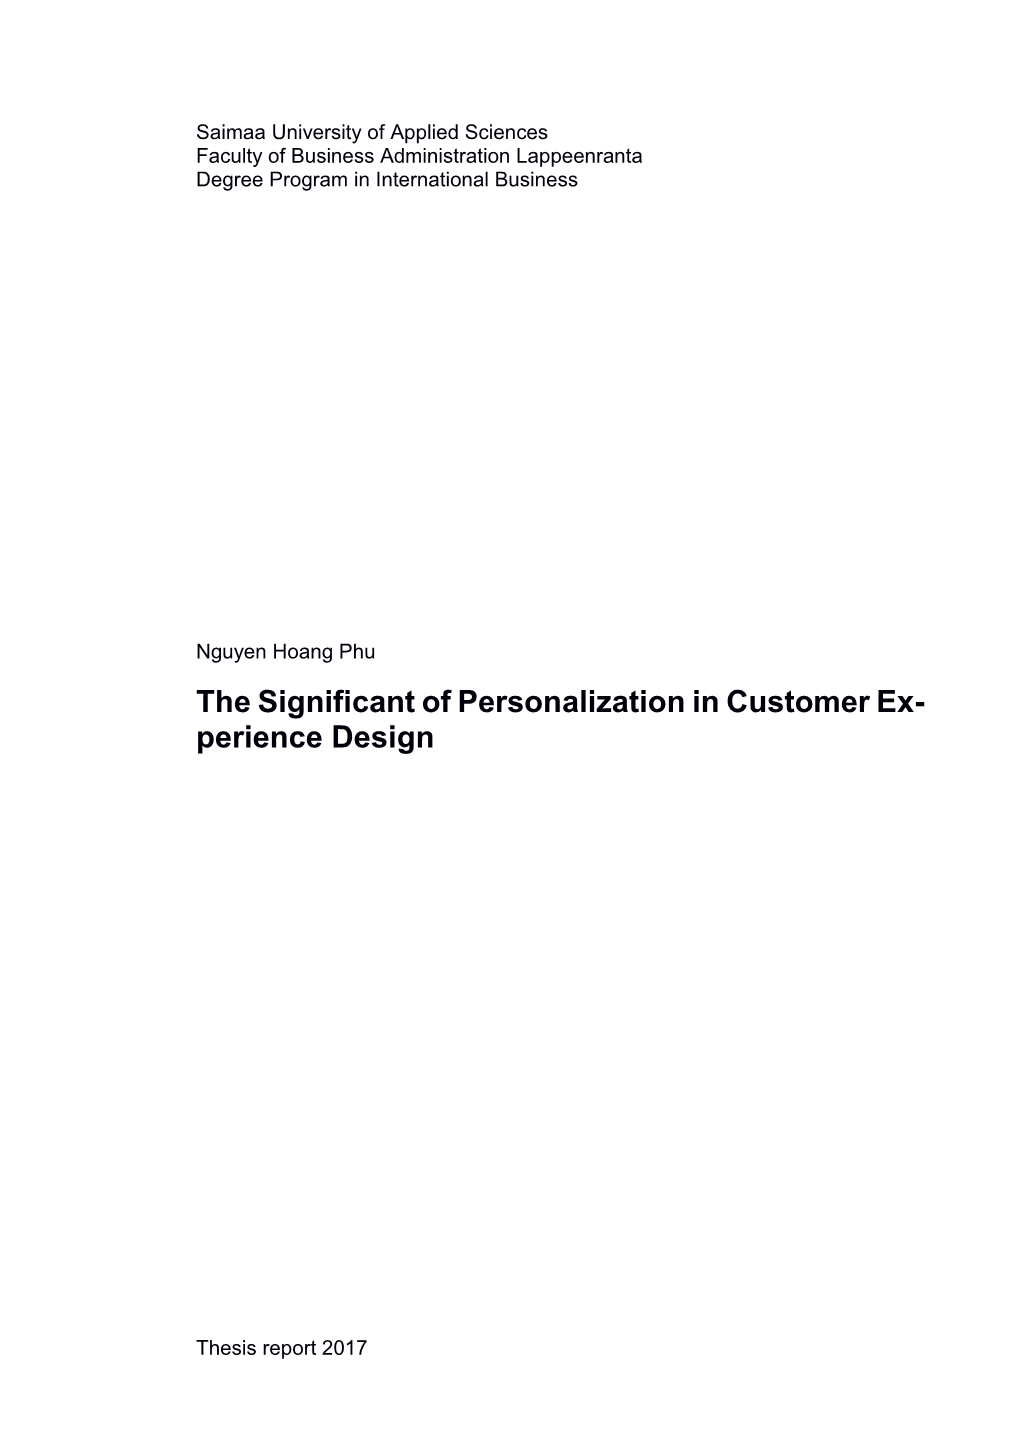 The Significant of Personalization in Customer Ex- Perience Design